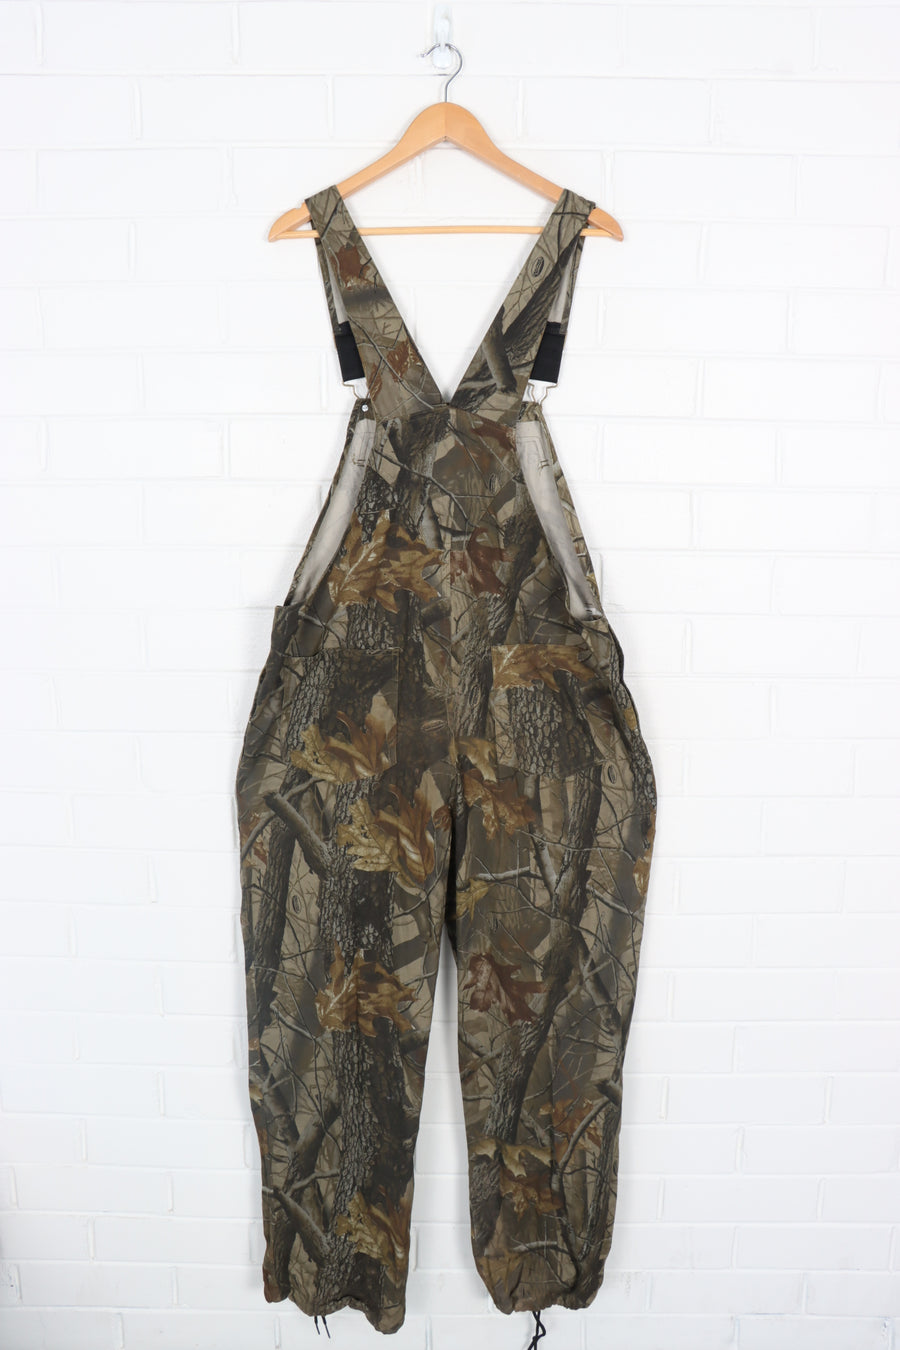 Outfitters Ridge Camo Hunting Long Overalls (L 42-44)